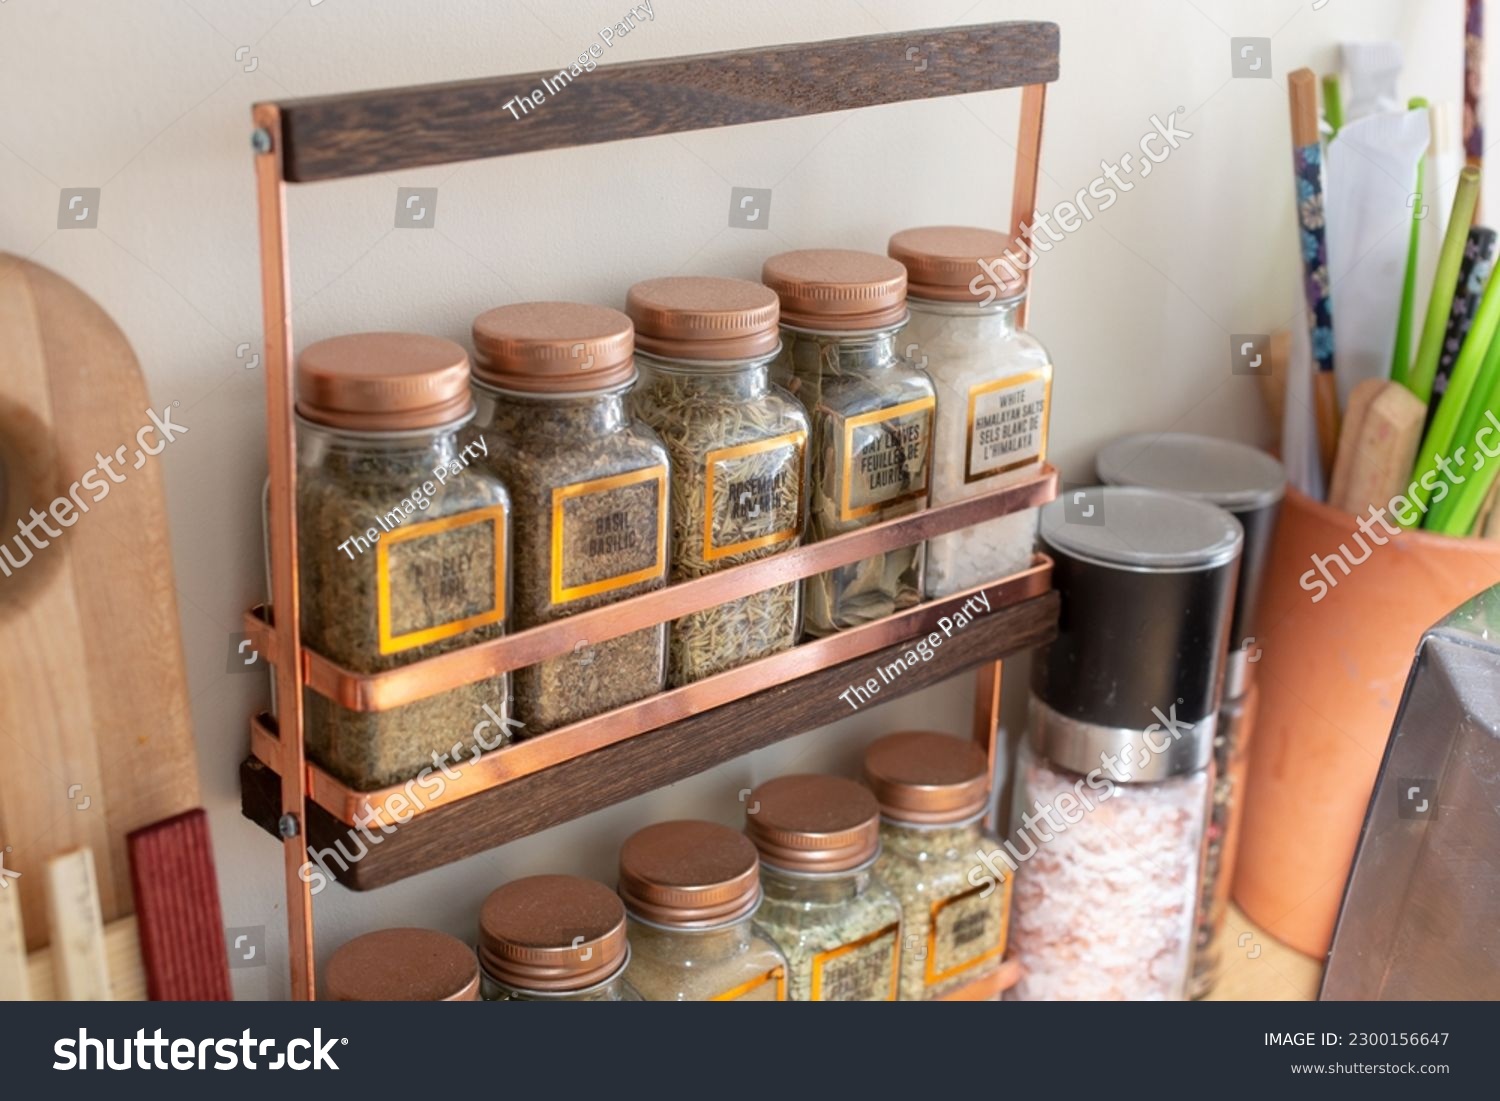 A view of a counter spice rack, seen in a home kitchen setting. #2300156647